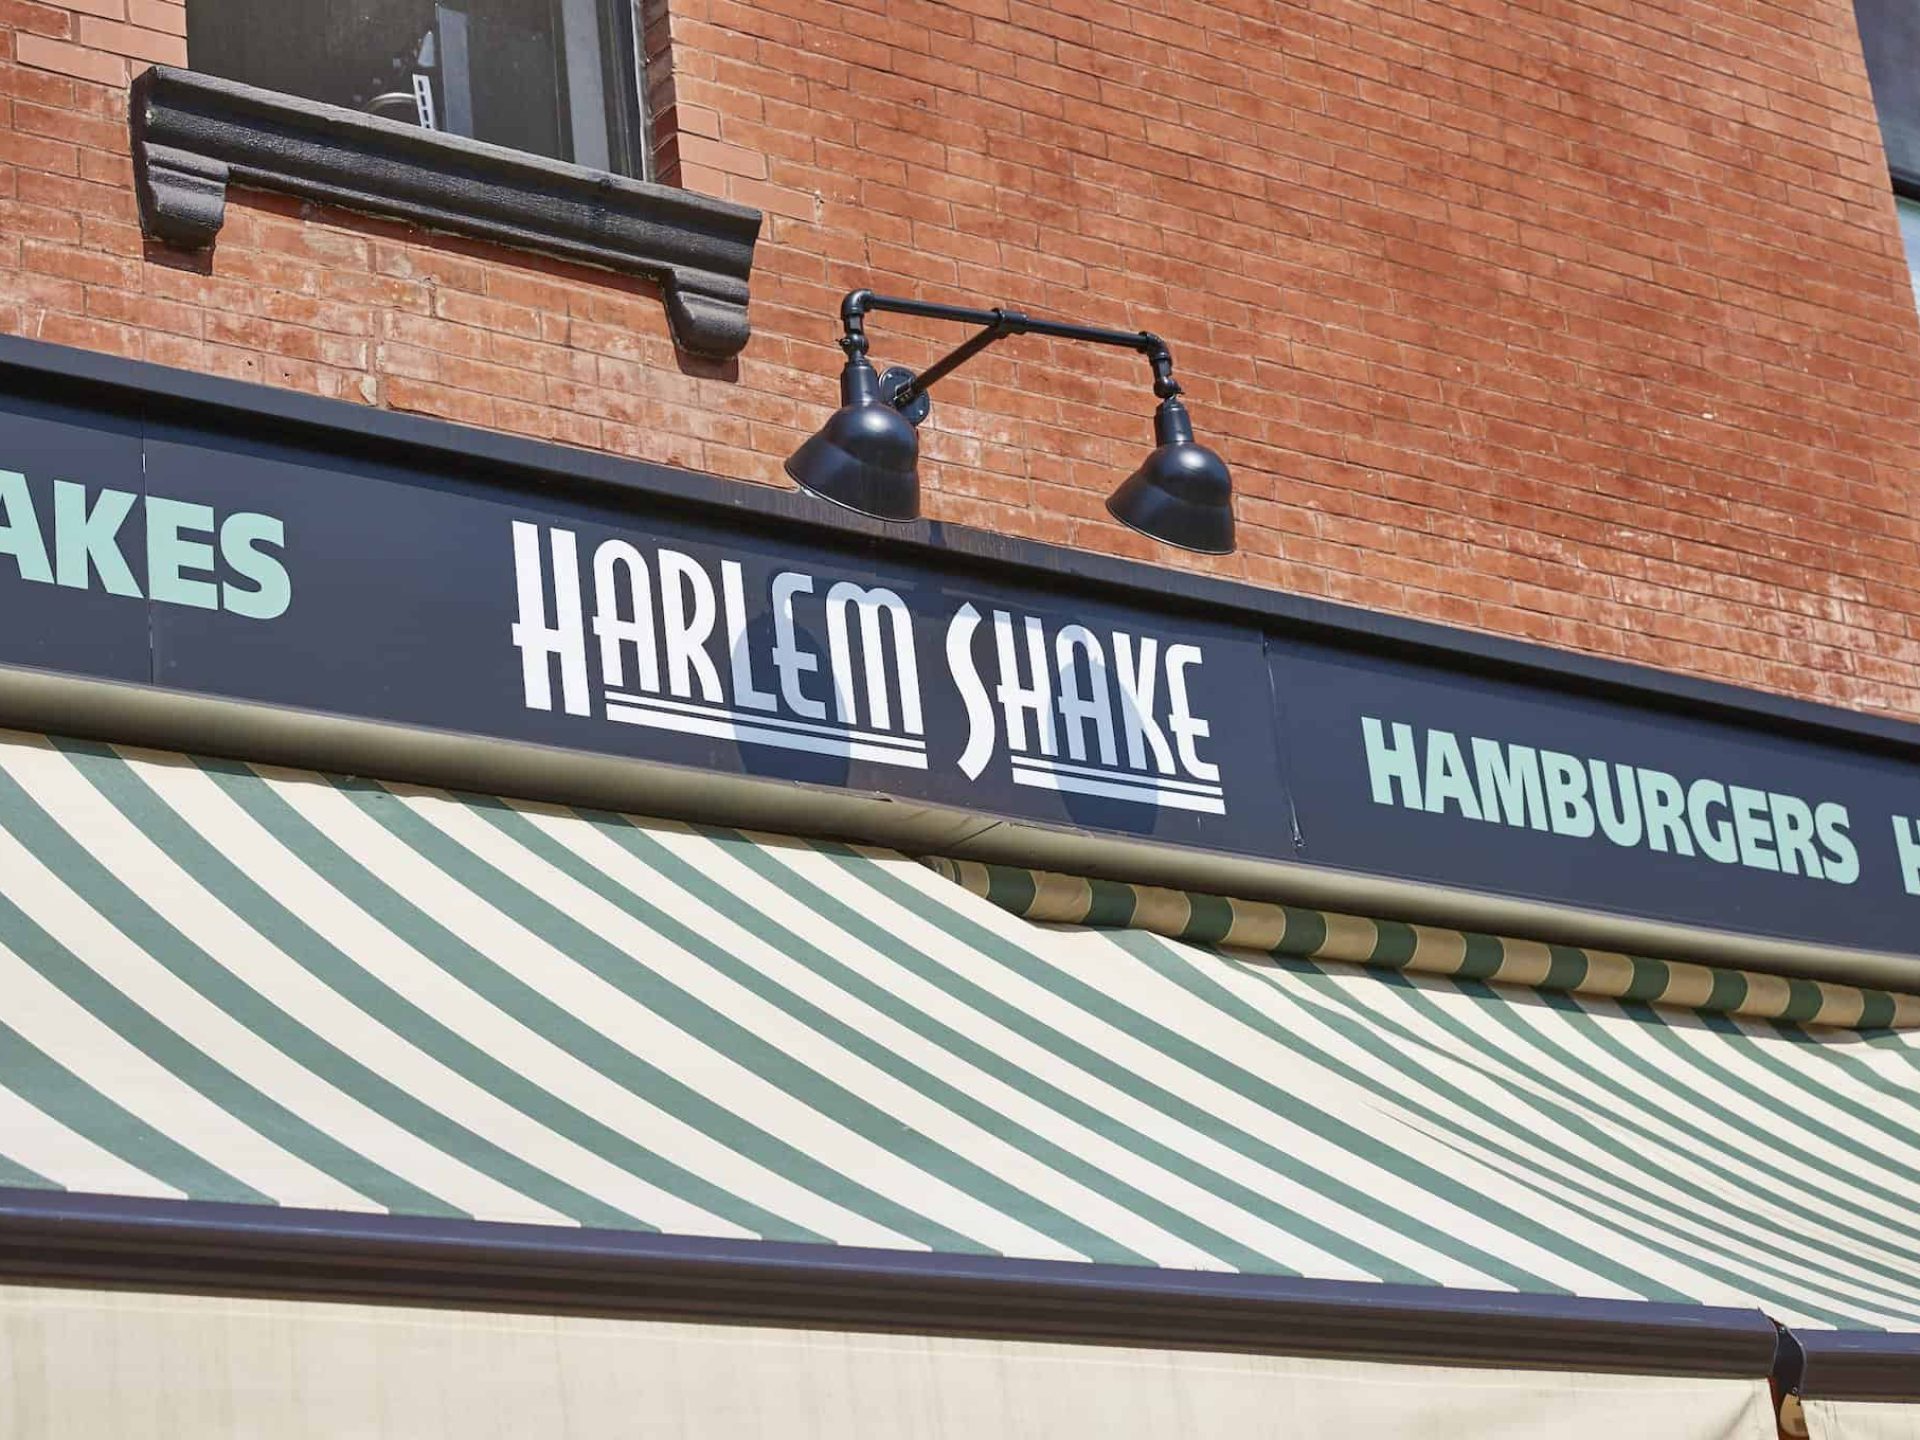 Close up of "Harlem Shake" restaurant with mounted lights above business sign and a striped awning below the sign.